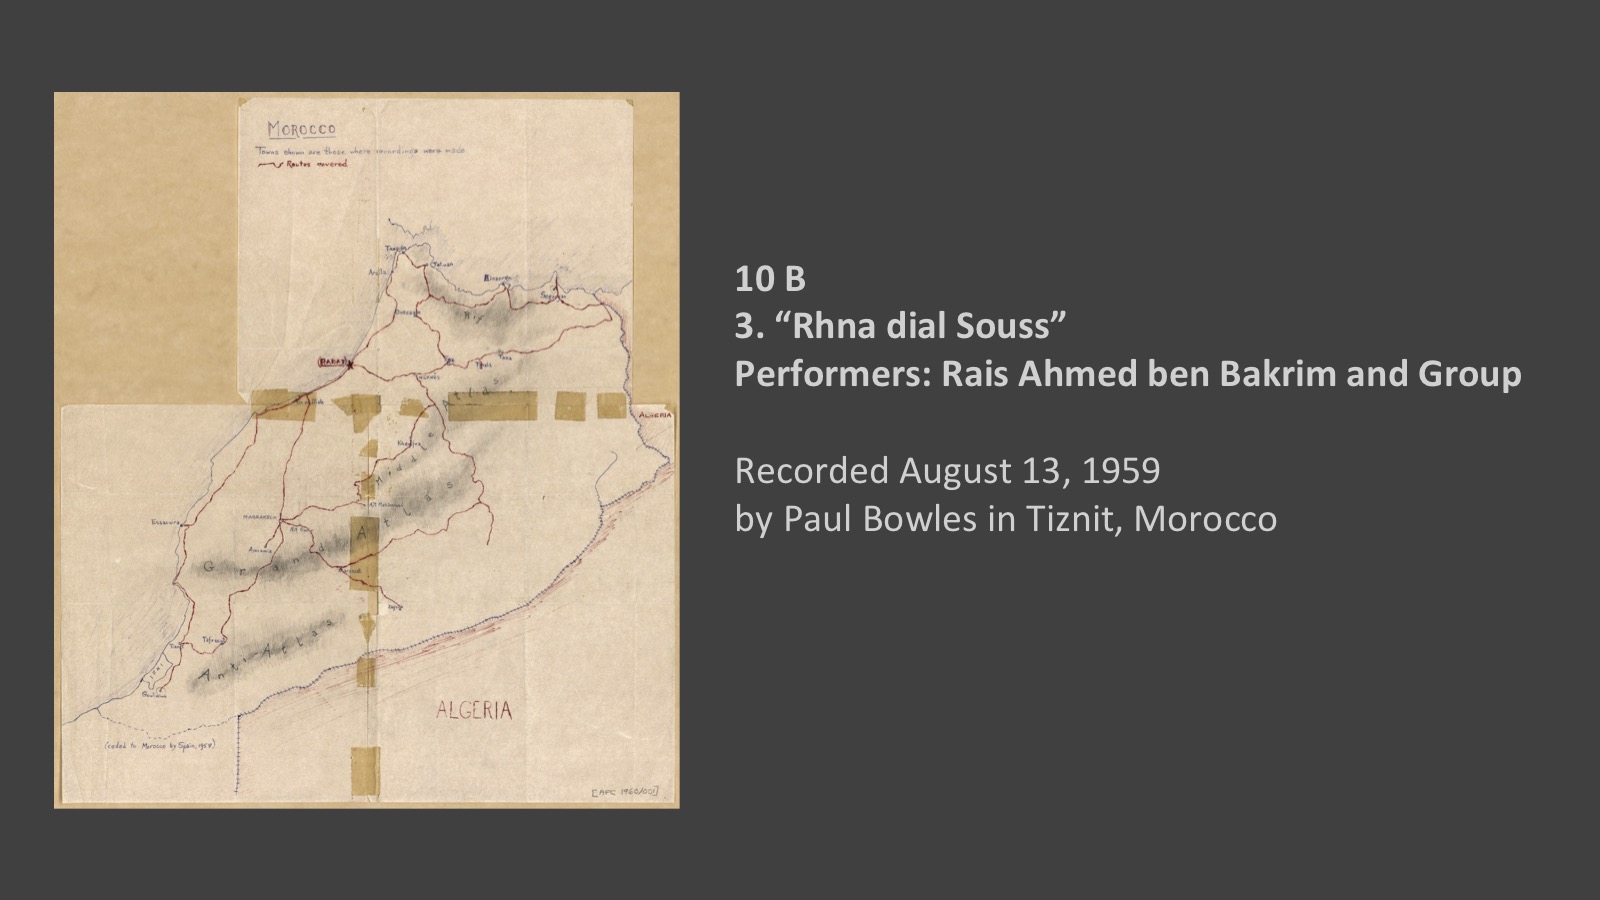 10 B
3. “Rhna dial Souss” 
Performers: Rais Ahmed ben Bakrim and Group

Recorded August 13, 1959
by Paul Bowles in Tiznit, Morocco